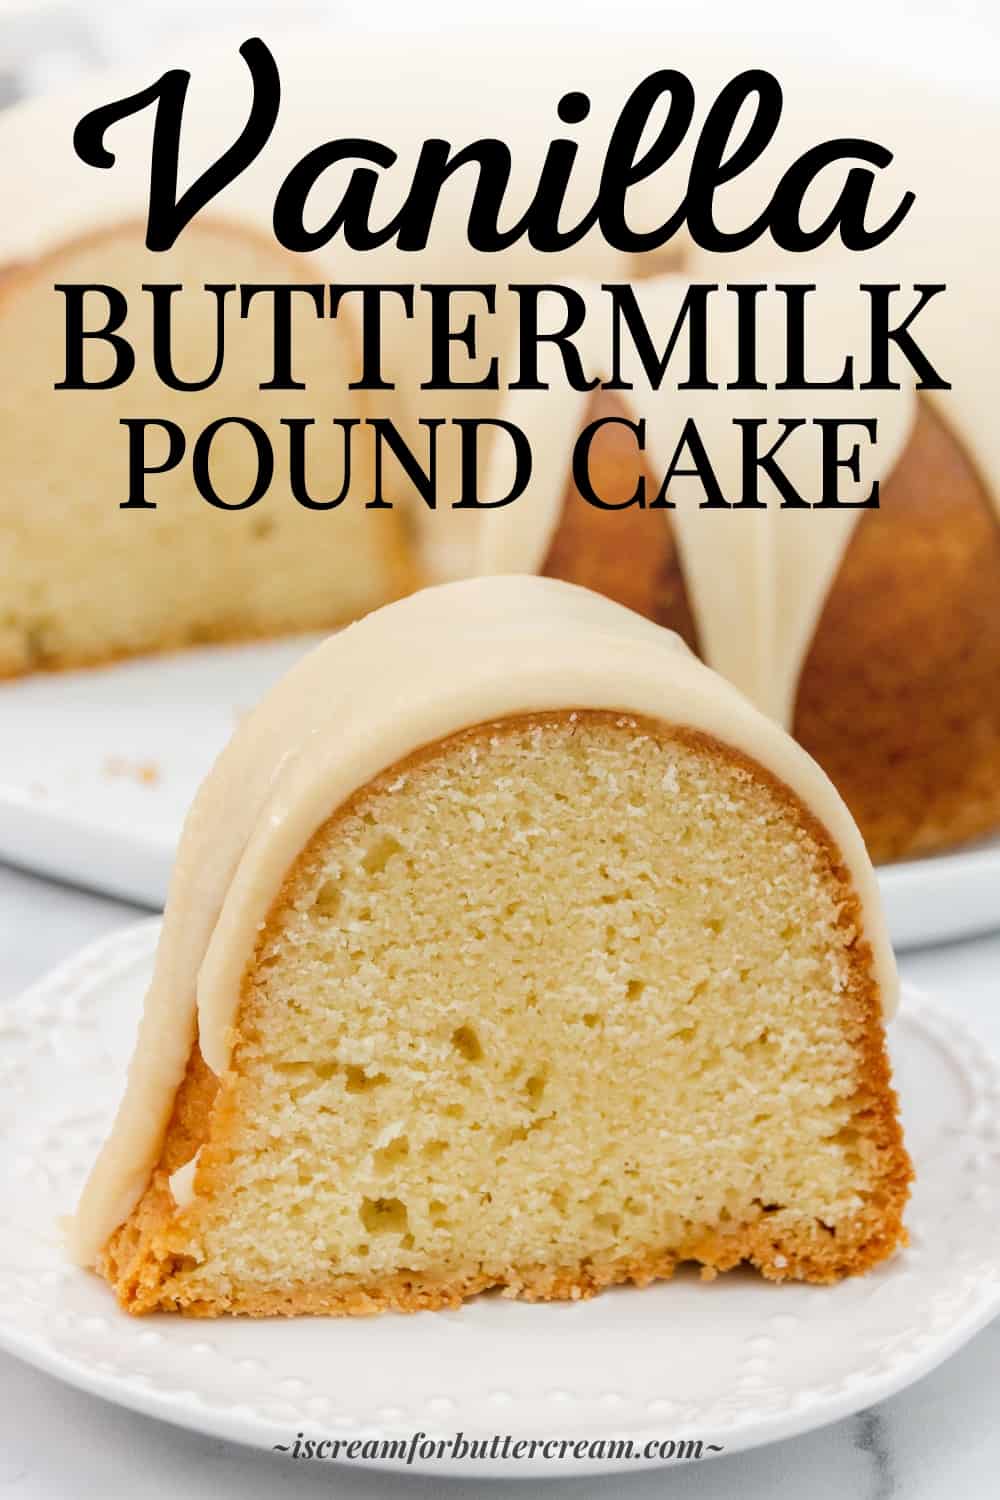 Pinterest image of slice of pound cake with buttermilk on a white plate.